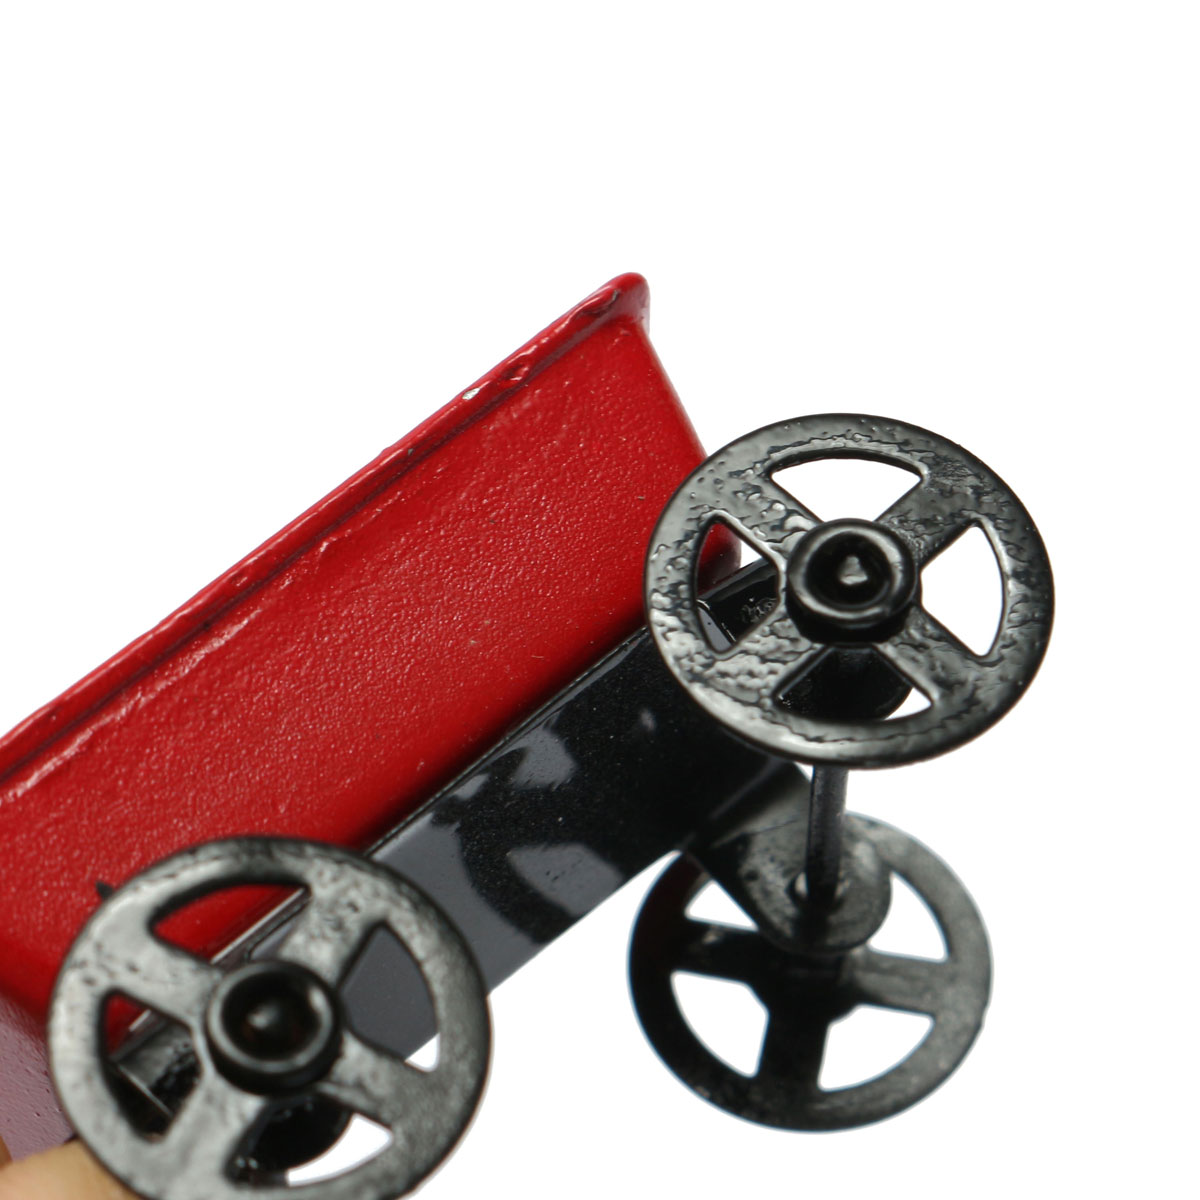 Dollhouse-Metal-Miniature-Toy-Red-Small-Pulling-Cart-Garden-Furniture-Accessories-1016288-4